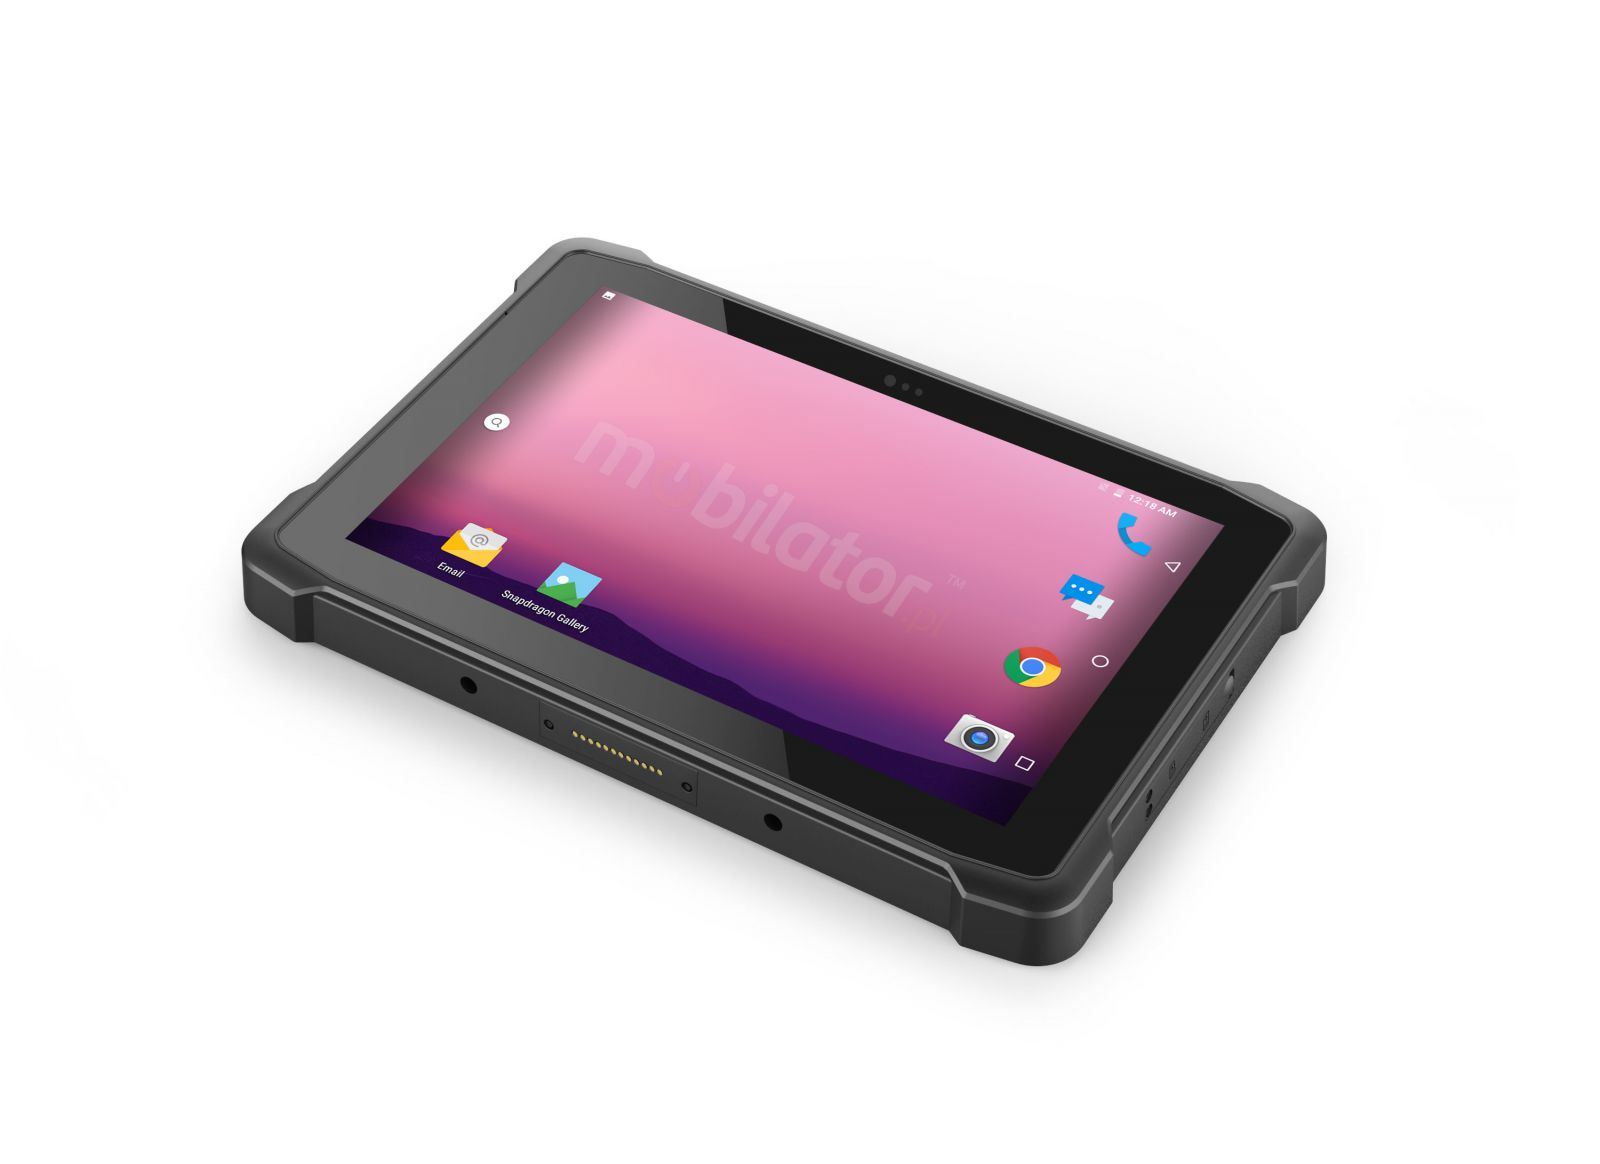 Emdoor Q11 v.1 - Industrial 10-inch tablet with IP65 + MIL-STD-810G and 4G, Bluetooth, 4GB RAM, 64GB ROM and NFC disk 